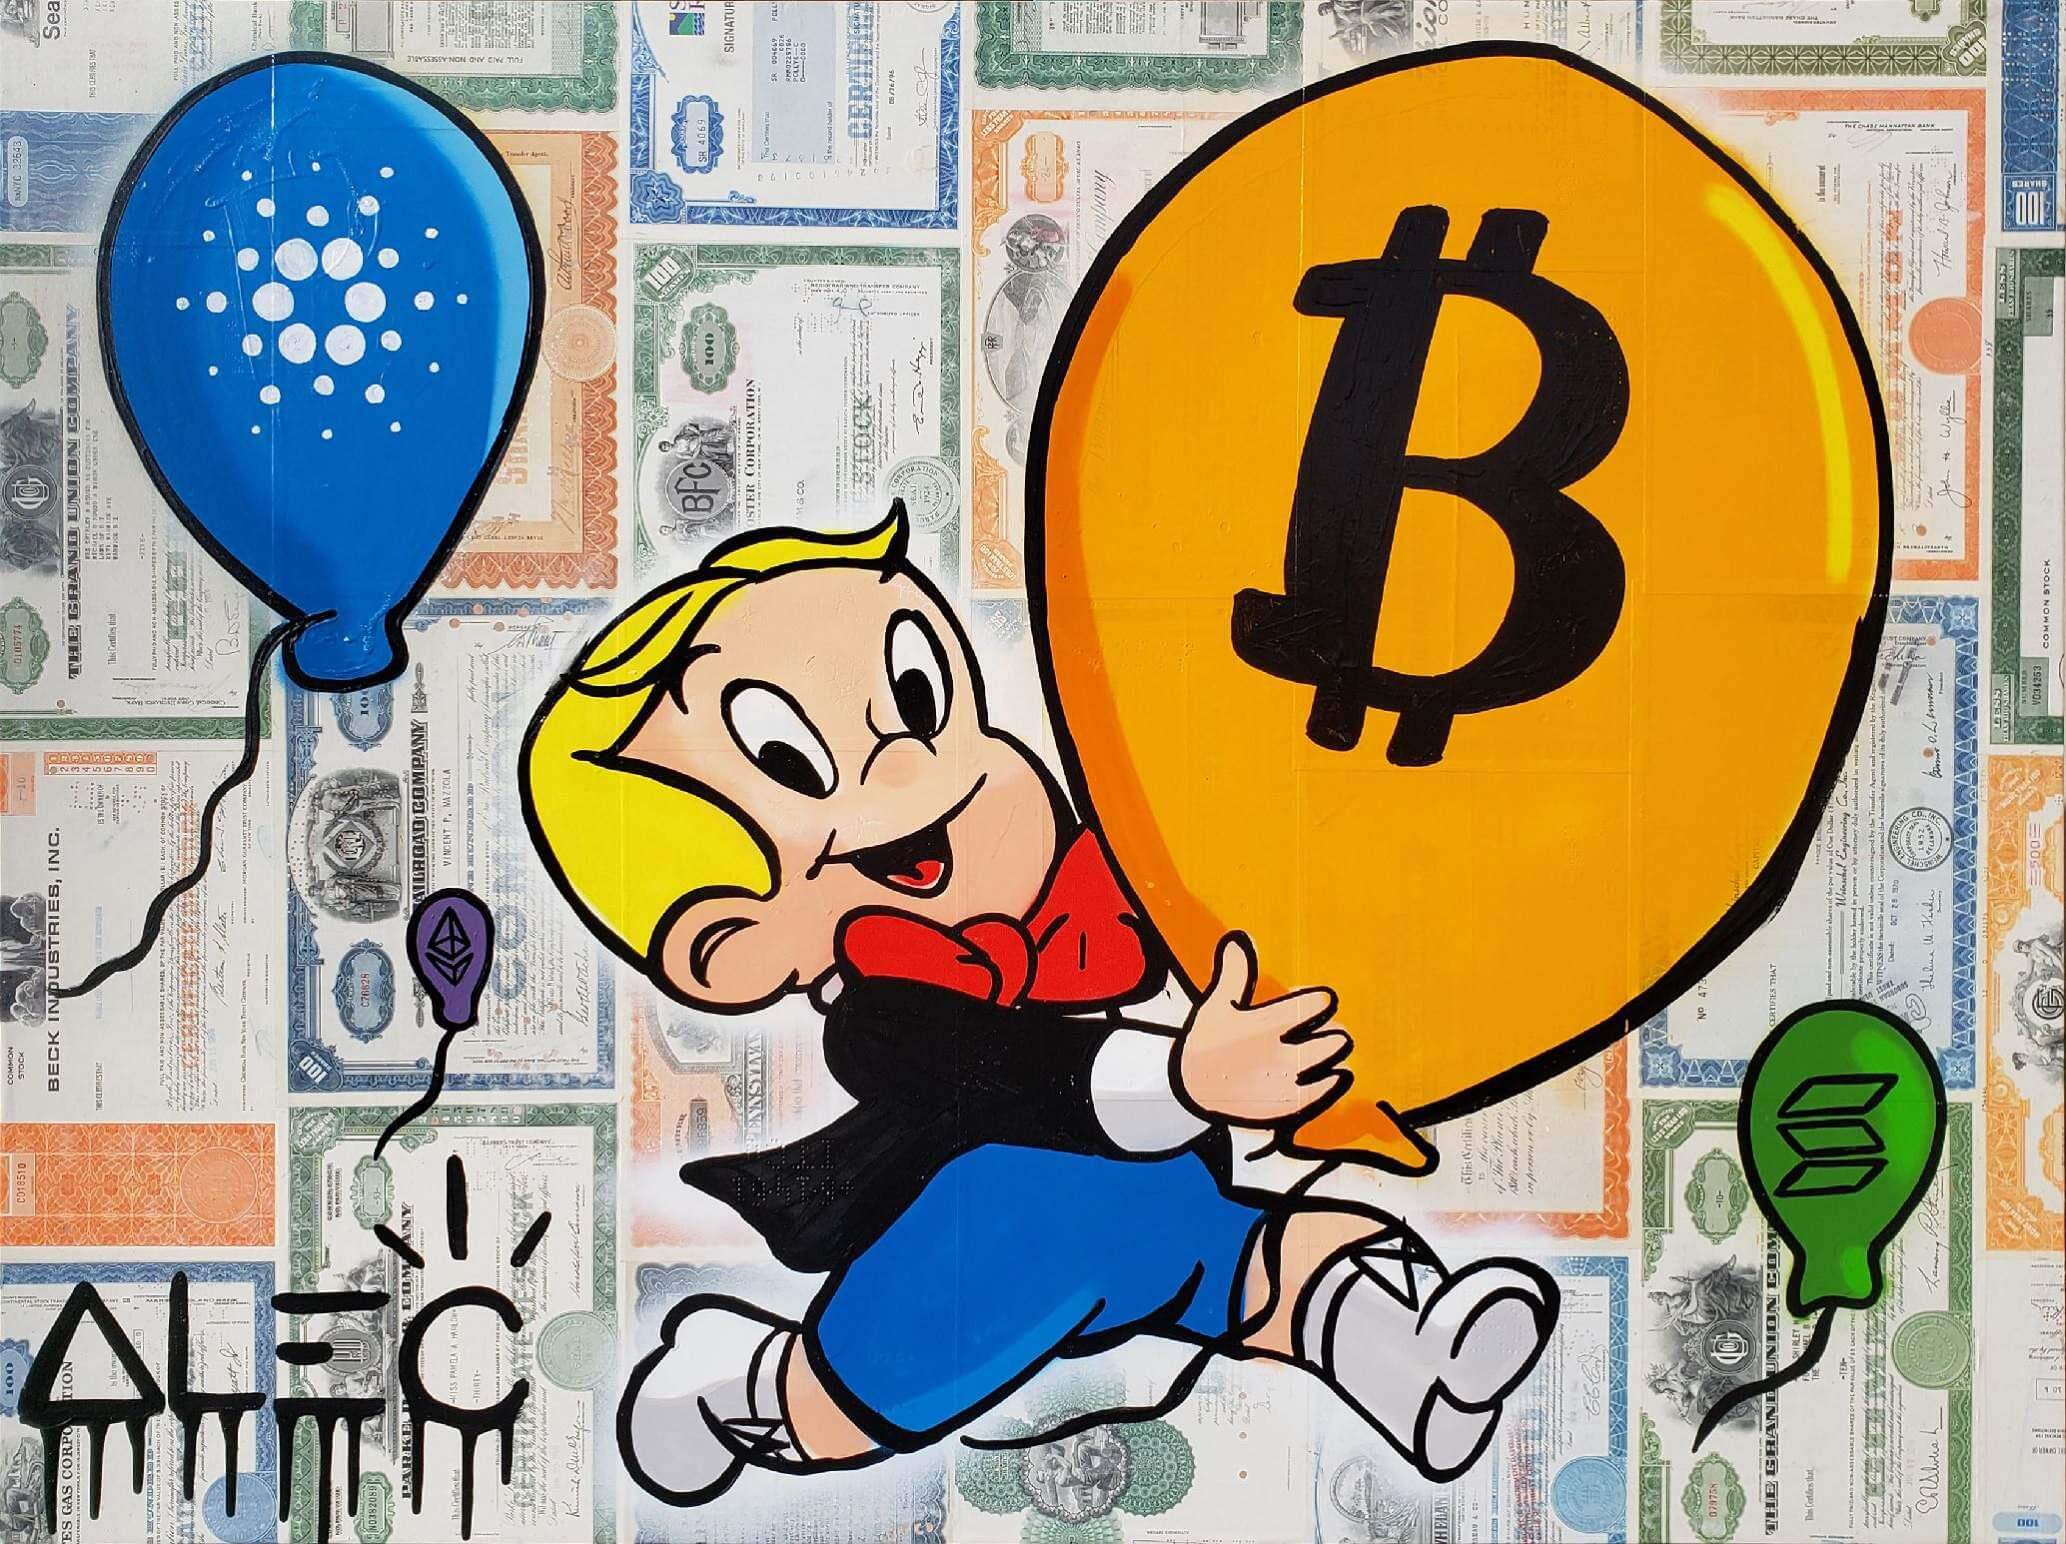 Richie Running with Crypto Balloons - Alec Monopoly - Eden Gallery